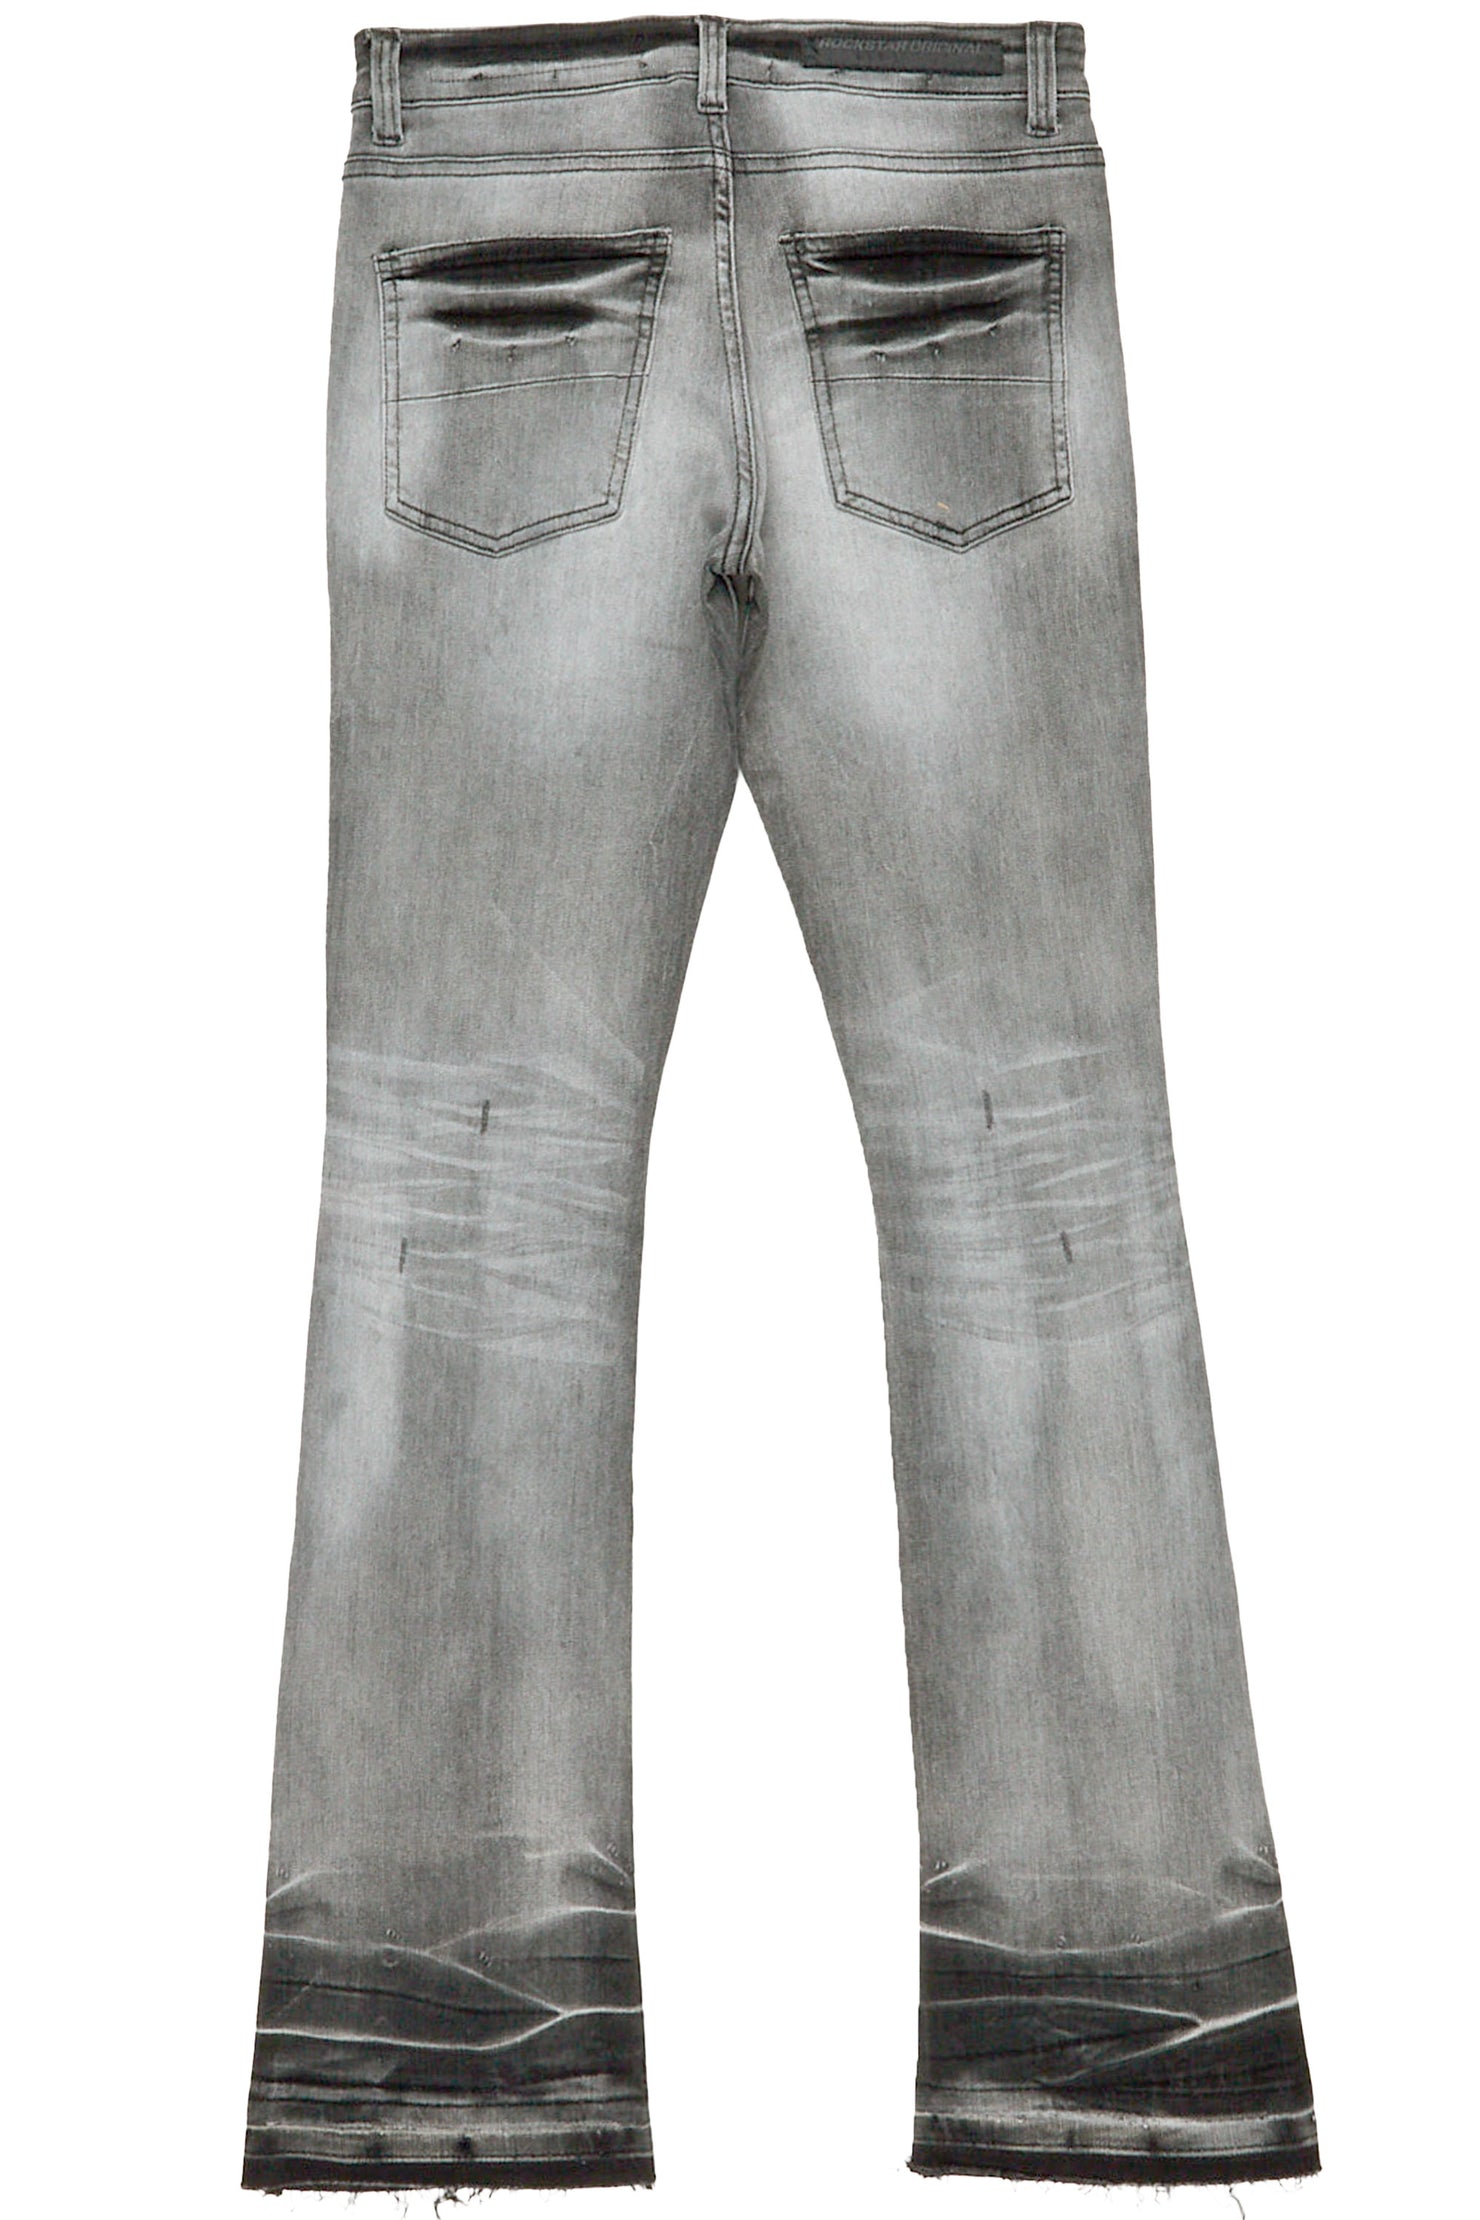 Parq Grey Stacked Flare Jean